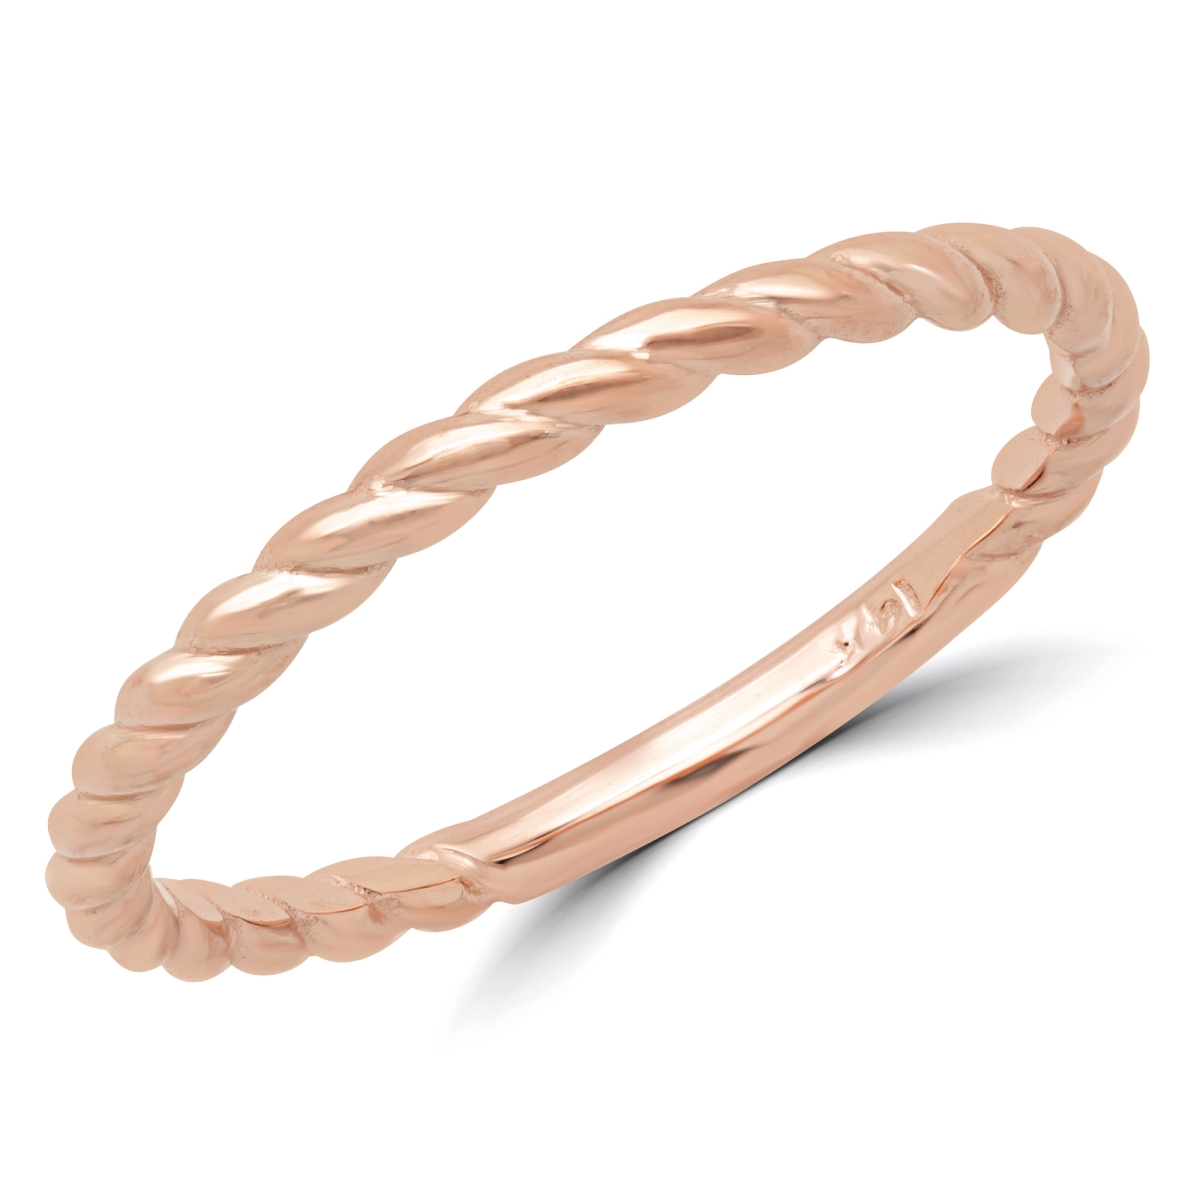 Picture of Majesty Diamonds MD180603-6.75 Braided Rope Classic Wedding Band Ring in 14K Rose Gold - Size 6.75